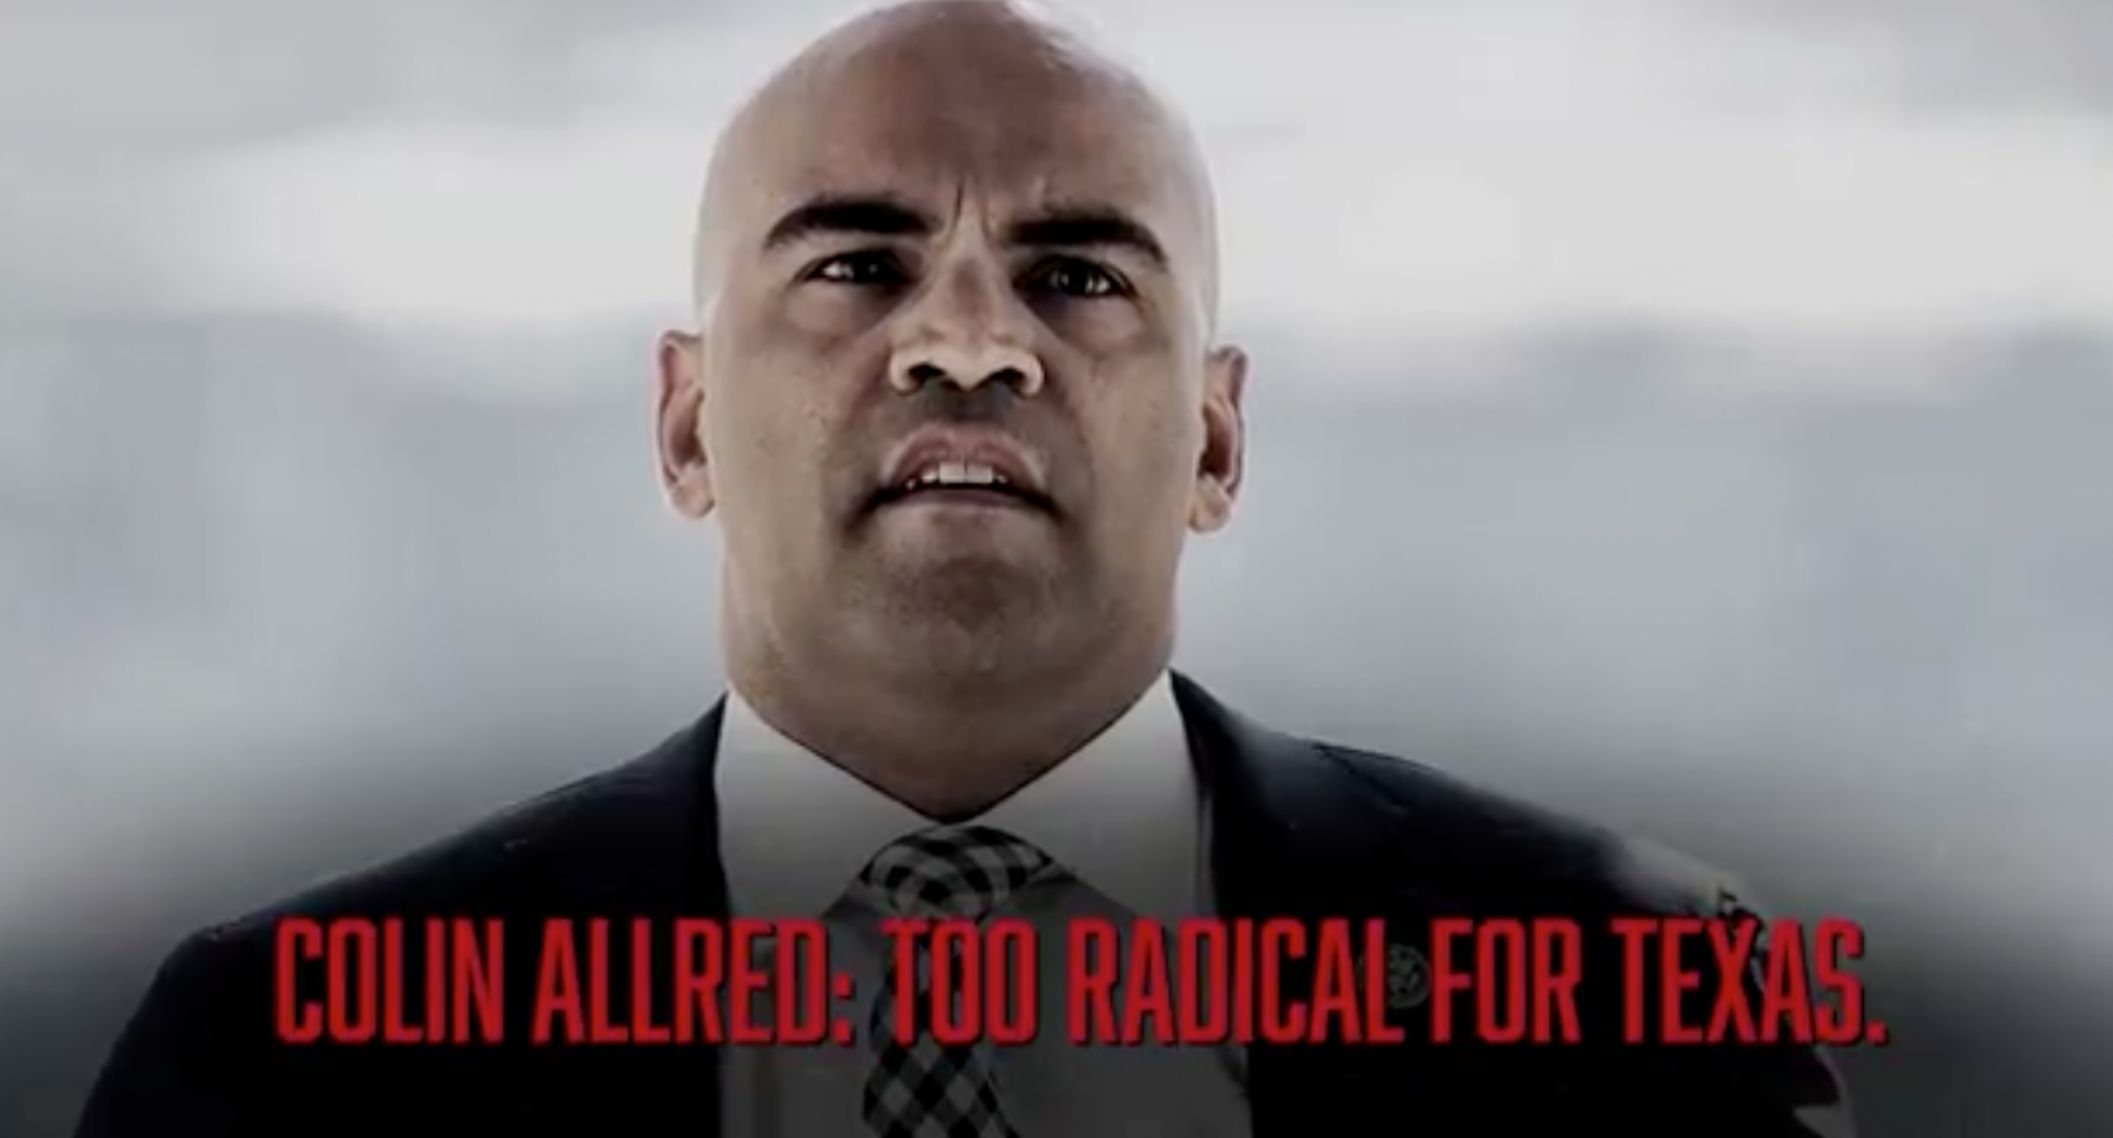 Screengrab from ad against Colin Allred